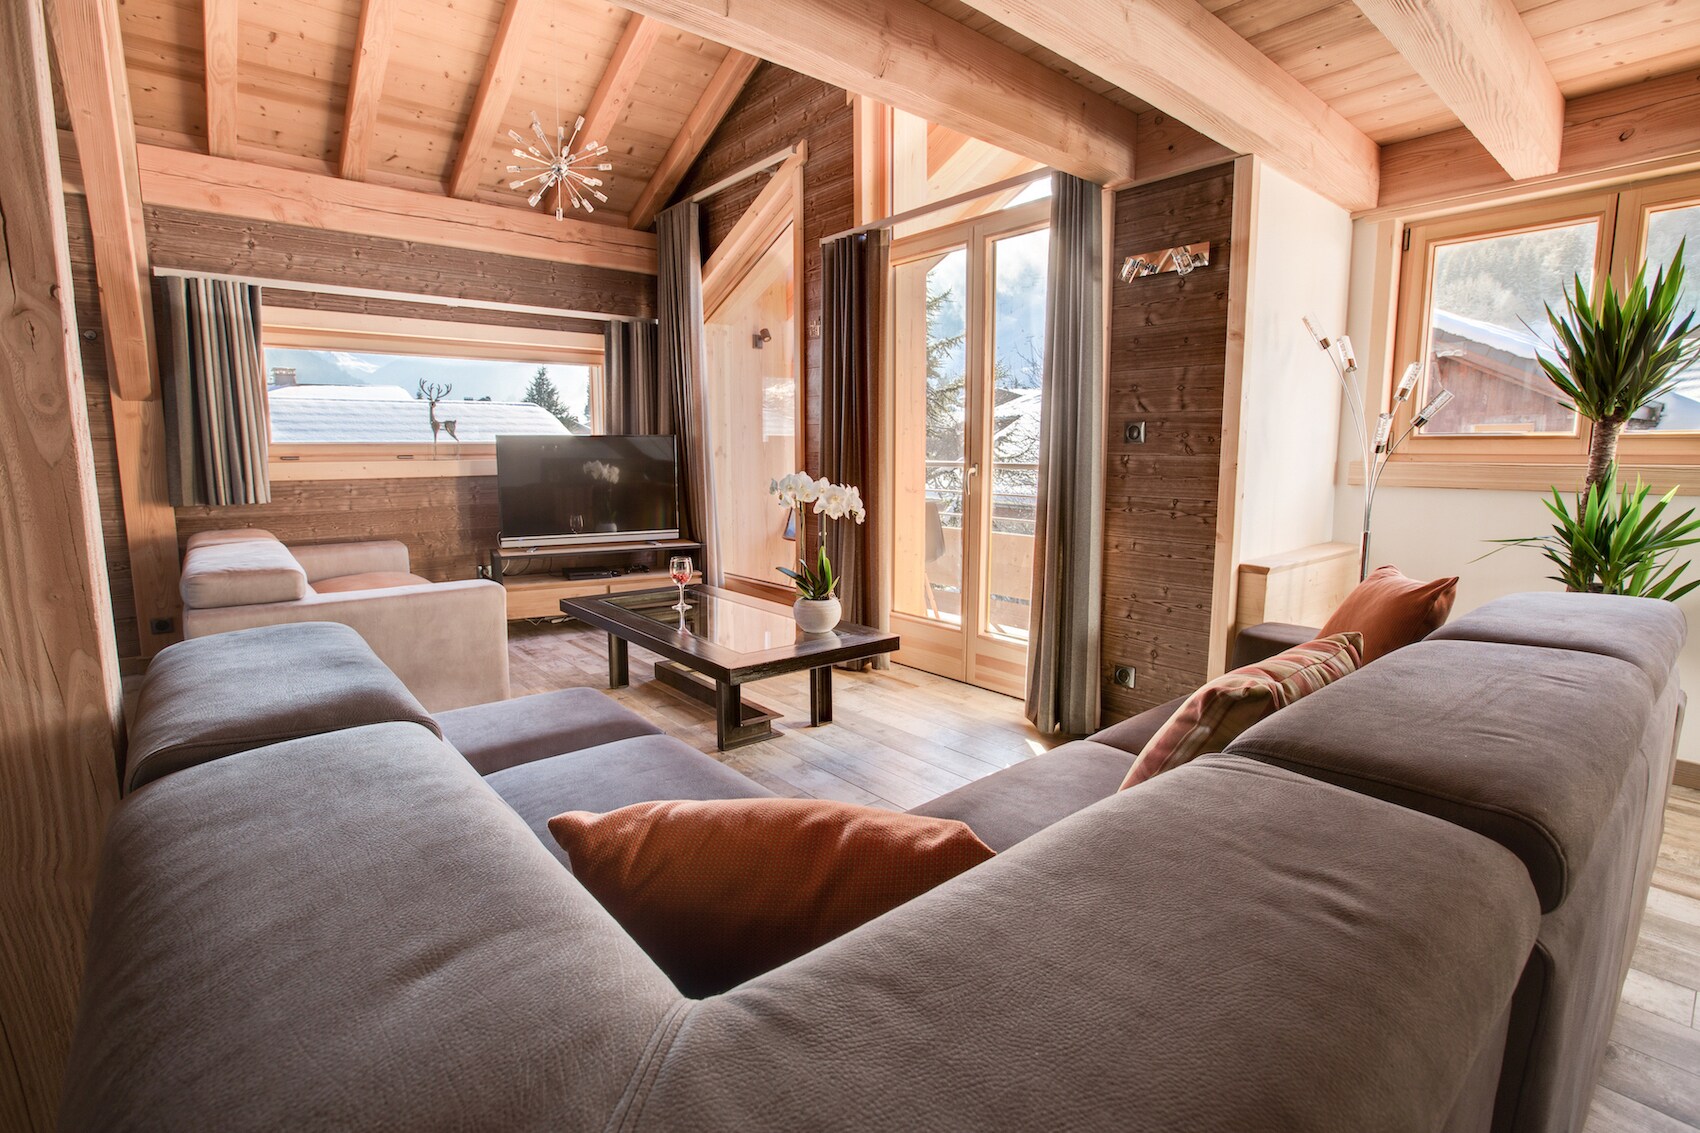 Property Image 2 - Nice Charming Ski Resort Flat close to Lifts and Stores